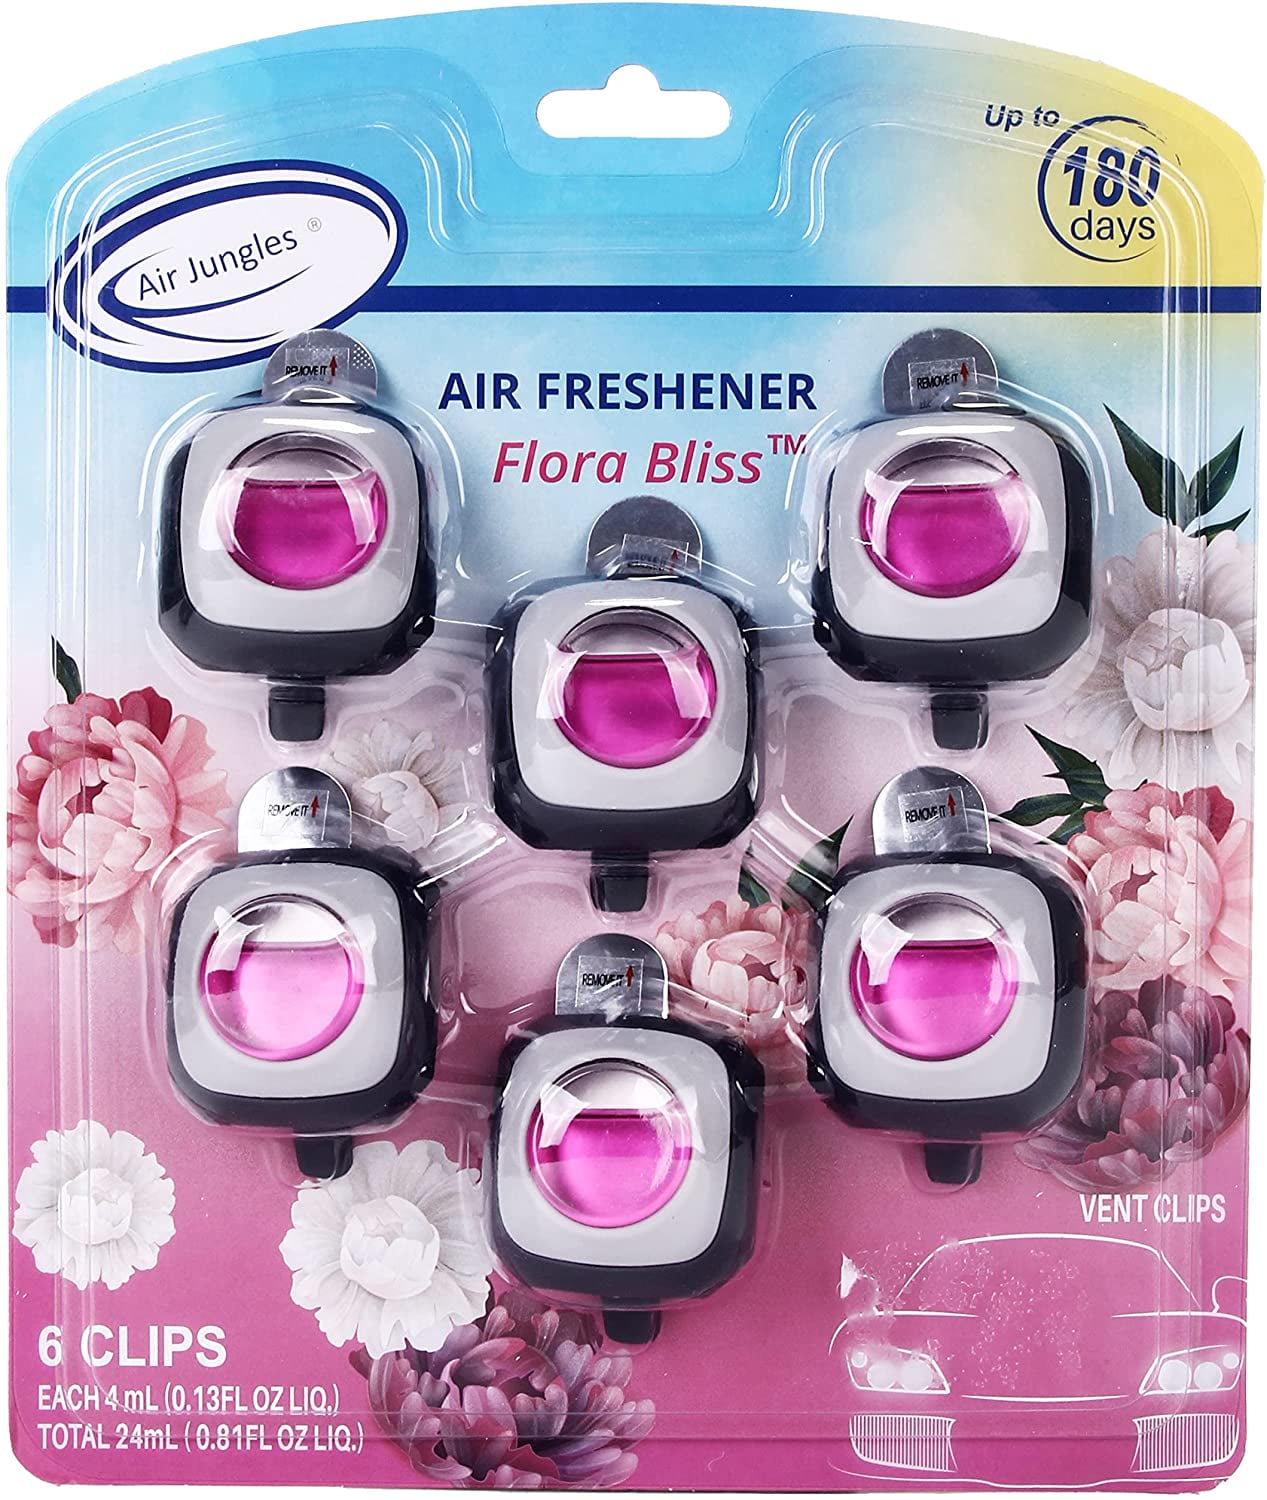 andobil 2 in1 Car Air Fresheners Vent Clips or Hanging - [Leak-Free &  Long-Lasting] Up to 60 Days Plant Solid Car Air Fresheners, Cute Air  Freshener